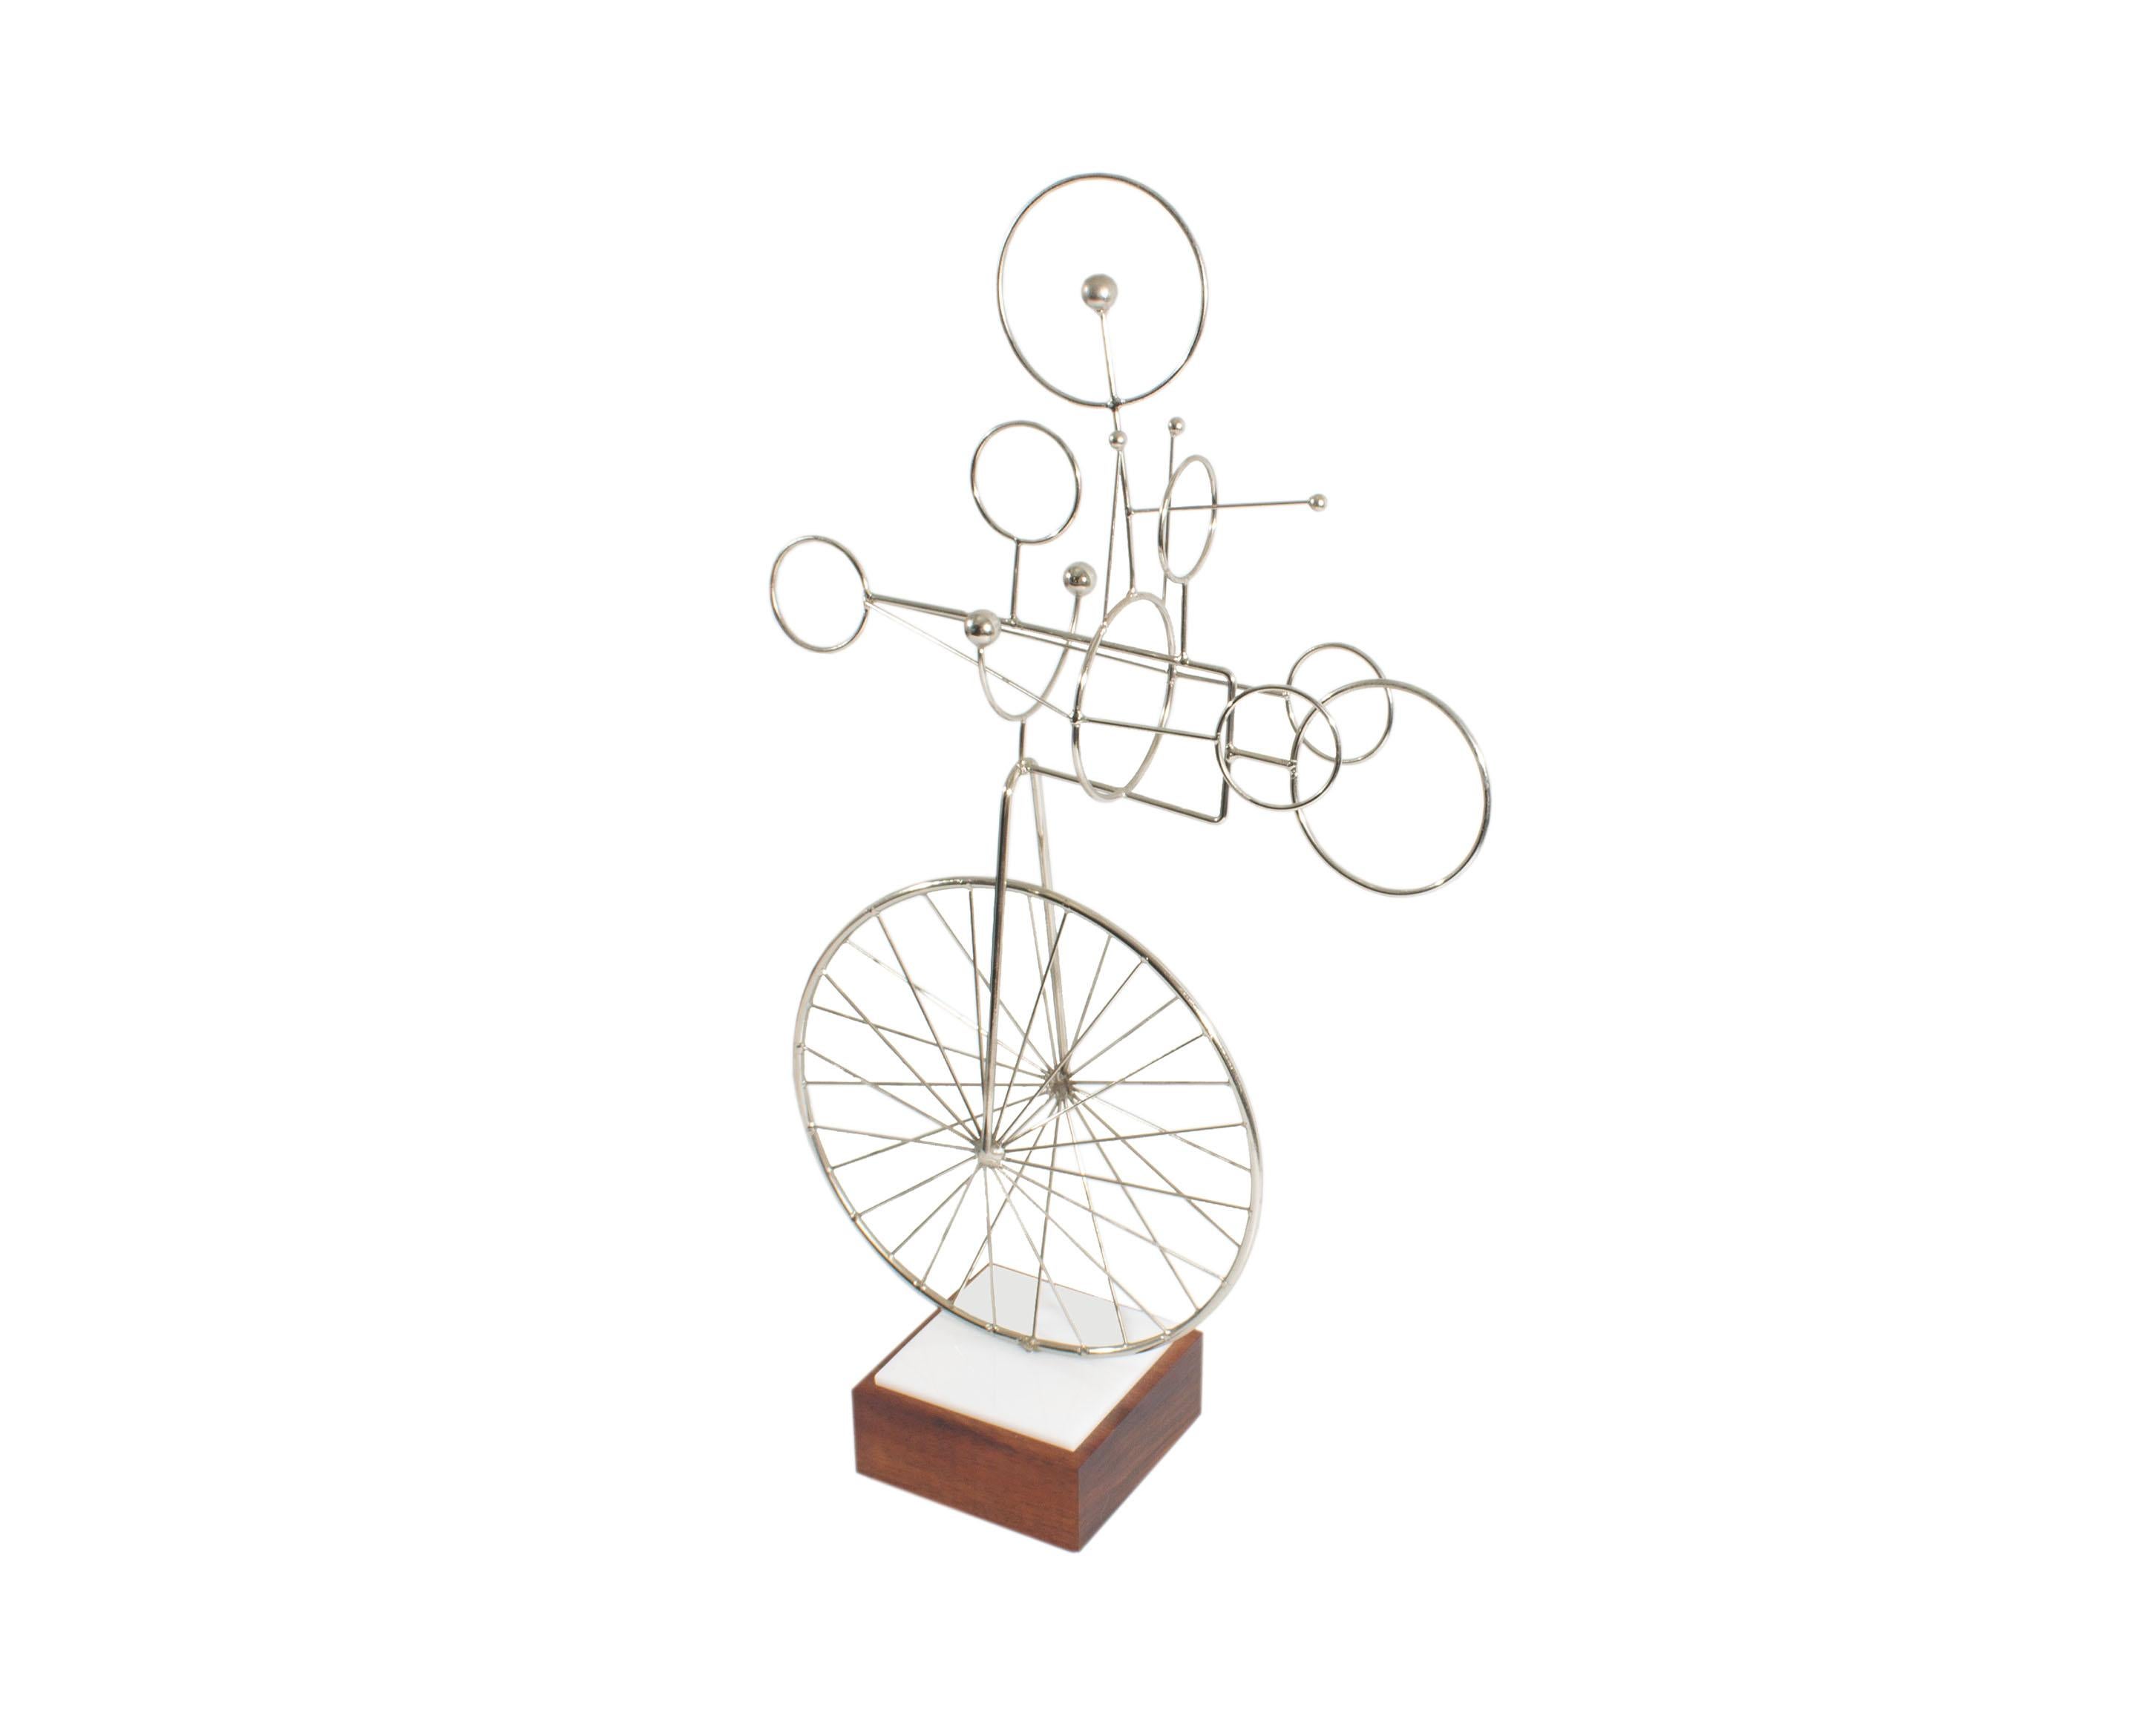 A metal bicycle sculpture by American artist Joseph Burlini (born 1937). Made in 1978, this sculpture is composed of multiple rods and circular chrome pieces forming an abstract bicycle attached to a white acrylic and wood base. The base is signed